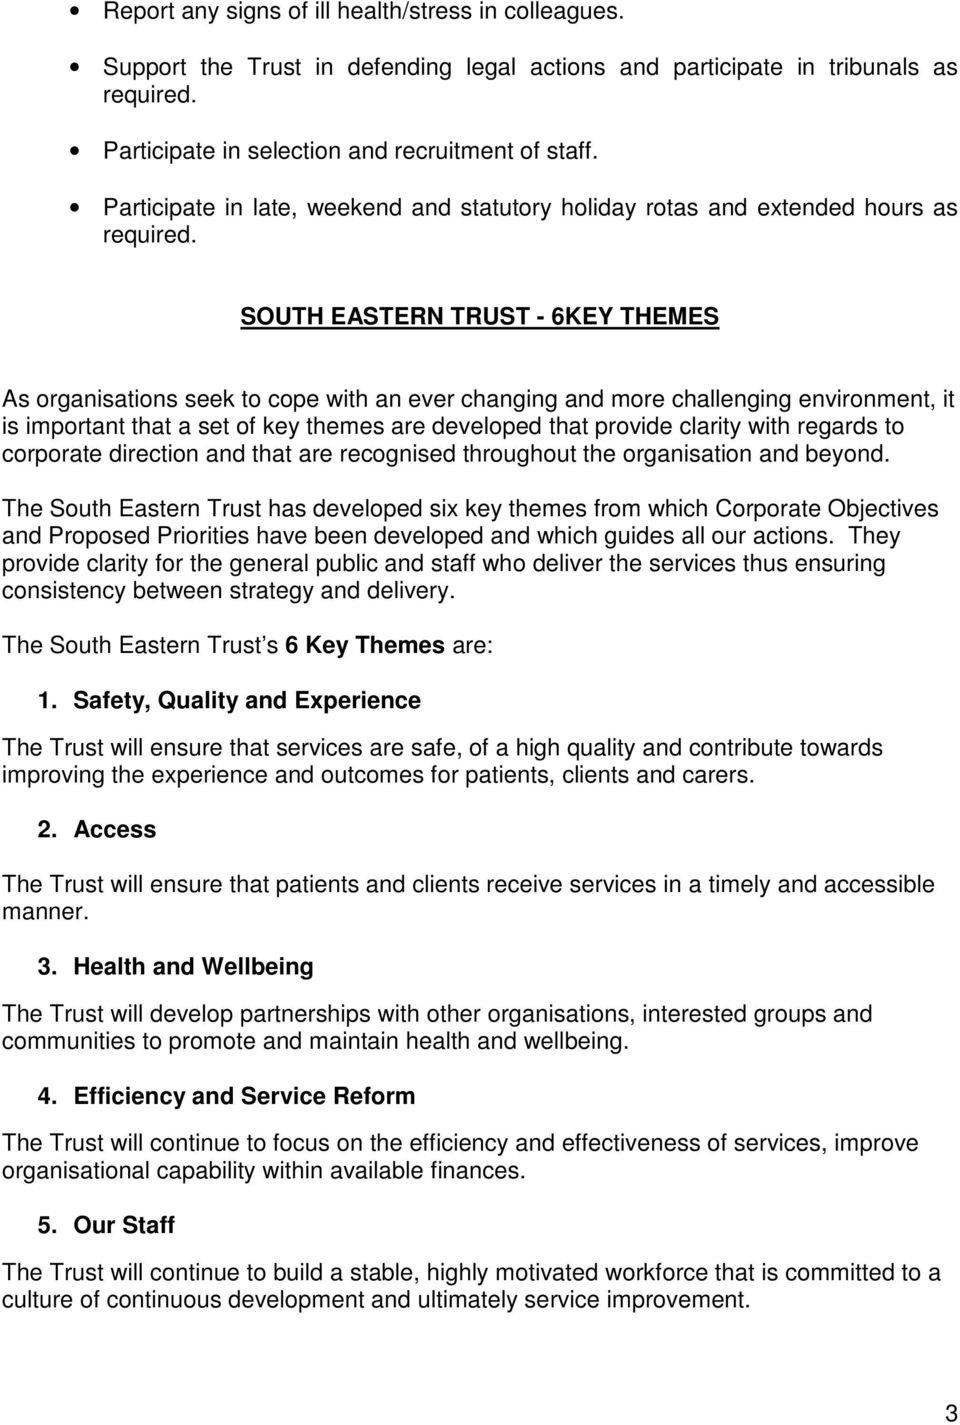 SOUTH EASTERN TRUST - 6KEY THEMES As organisations seek to cope with an ever changing and more challenging environment, it is important that a set of key themes are developed that provide clarity